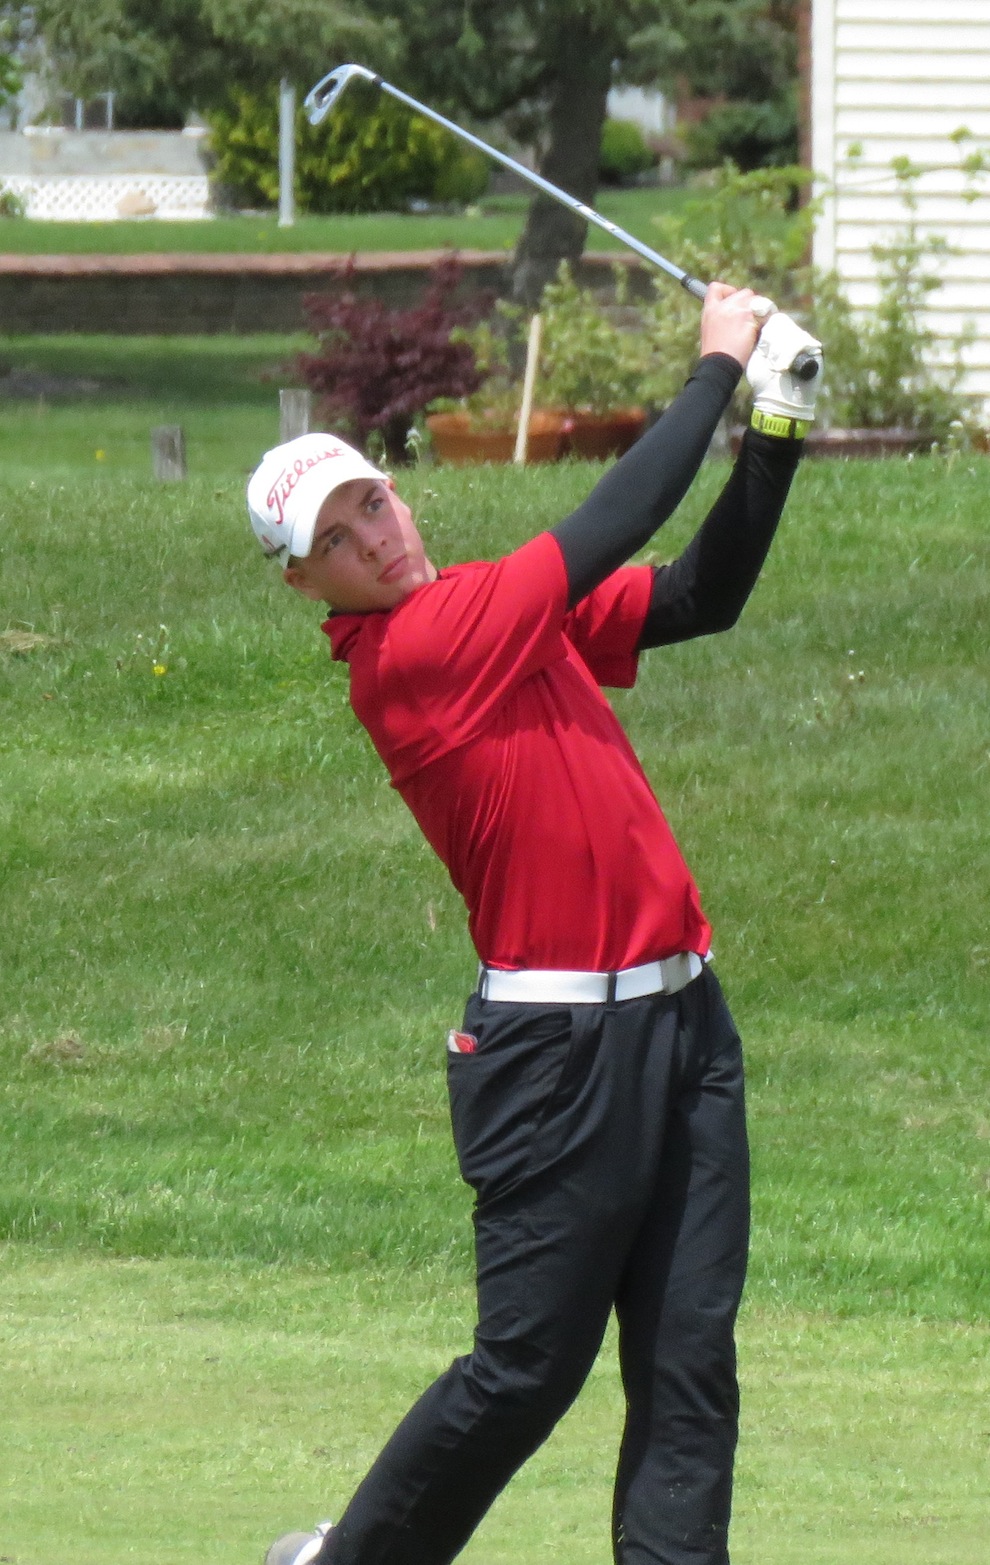 Anthony Delisanti hits an approach shot during Monday's Section VI tournament. (Photo by David Yarger)